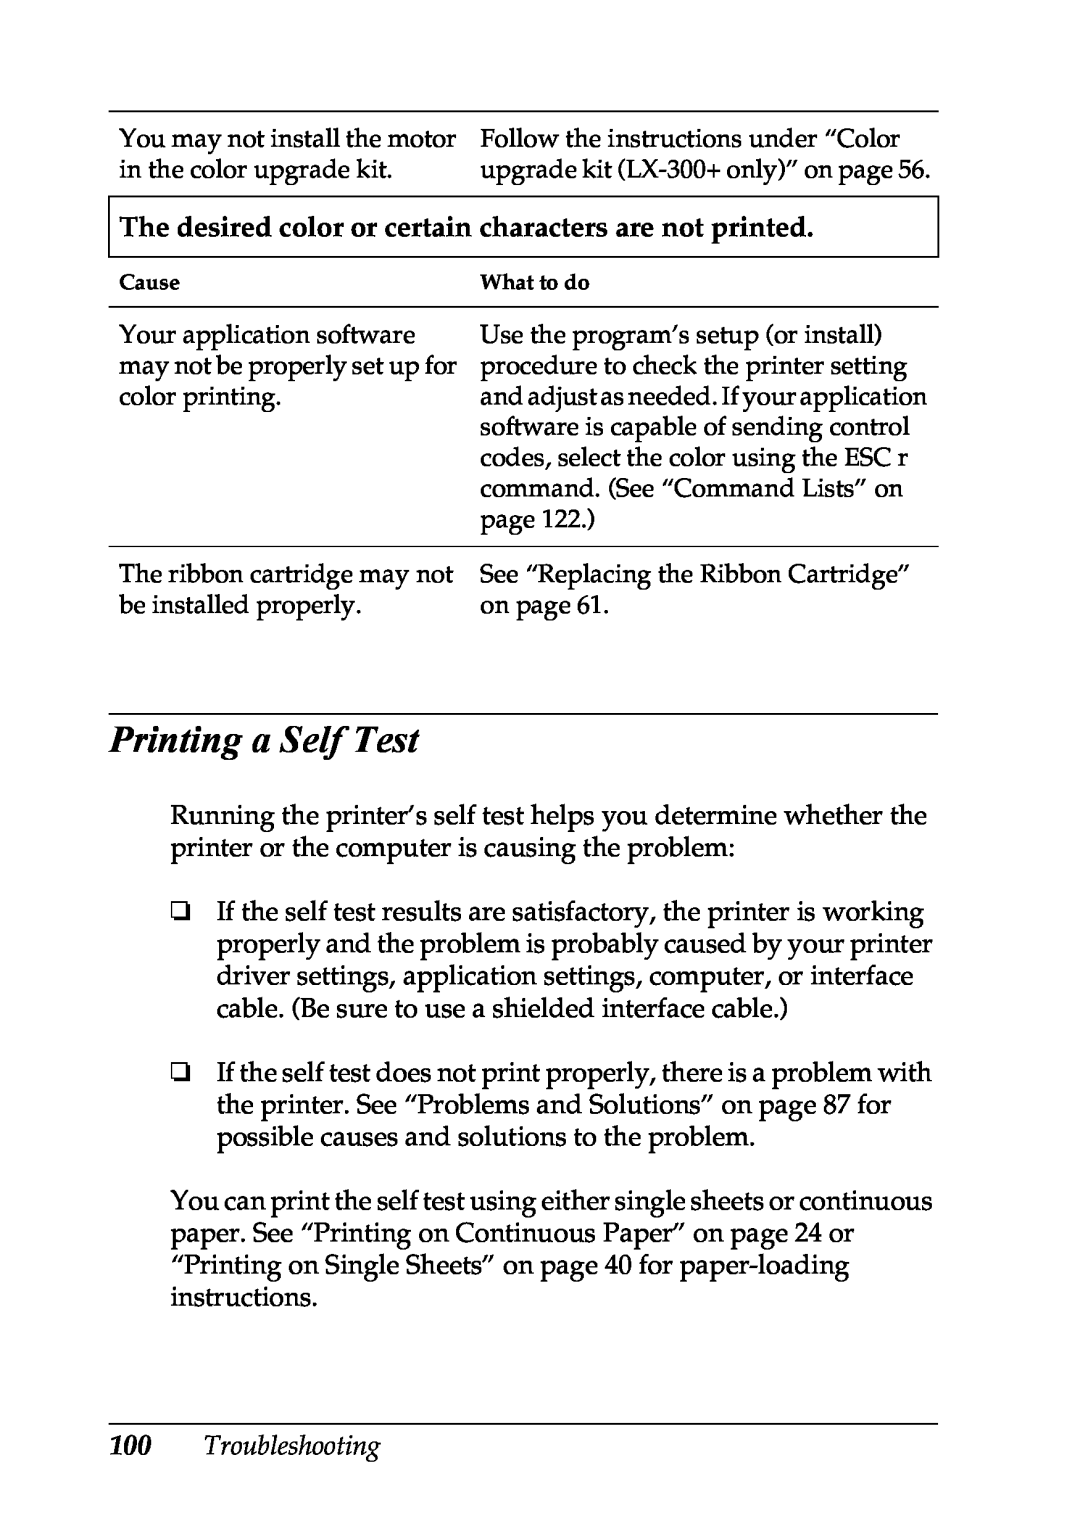 Epson LX-1170 manual Printing a Self Test, The desired color or certain characters are not printed 